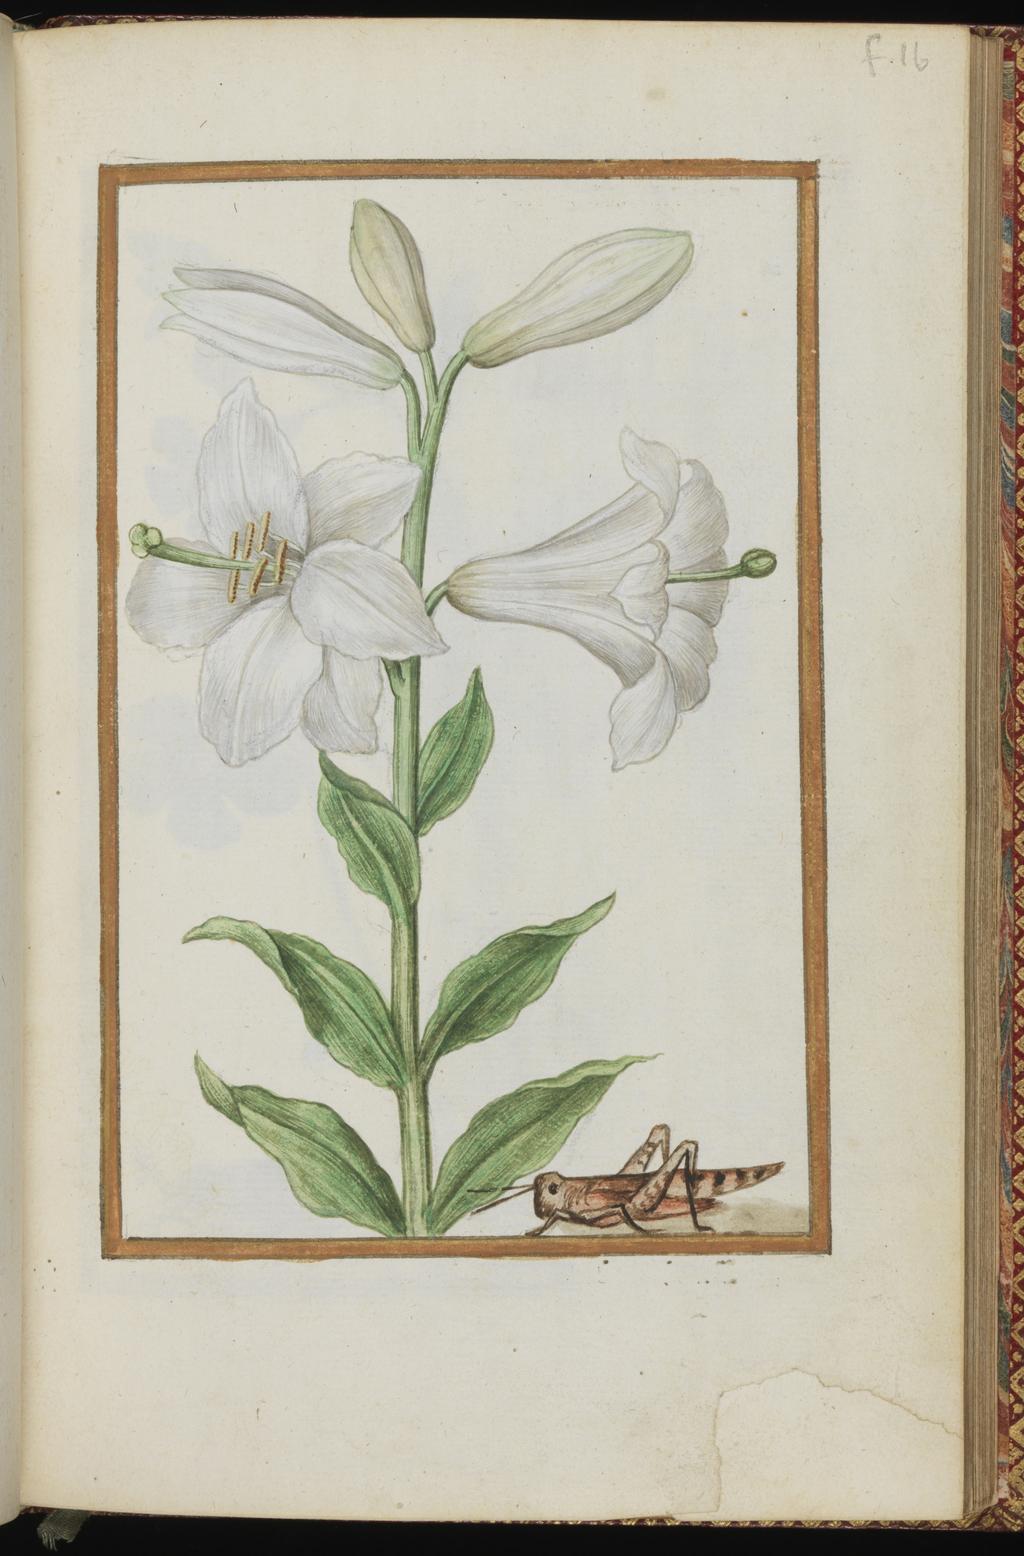 An image of Lilium candidum. Madonna Lily with a cicada. Album containing a dedicatory sonnet and 48 drawings. Pinet, Antoine du (French, op. c. 1584). Each of the drawings is framed by a border of gold paint of varying size according to the depth of the painted area. The drawings on white laid paper, watermarked with a bunch of grapes are bound into an album with a contemporary gold-tooled limp vellum cover bearing the arms, recto and verso of Louise of Lorraine (1553-1601). This, in turn, is bound into an eighteenth century French red morocco gilt binding. The spine is lettered in gold (see 'inscriptions/marks'). Each of the drawings is framed by a border of gold paint of varying size according to the depth of the painted area. Blank ff not detailed elsewhere. Height, sheet size, 204 mm, width, sheet size, 139 mm.